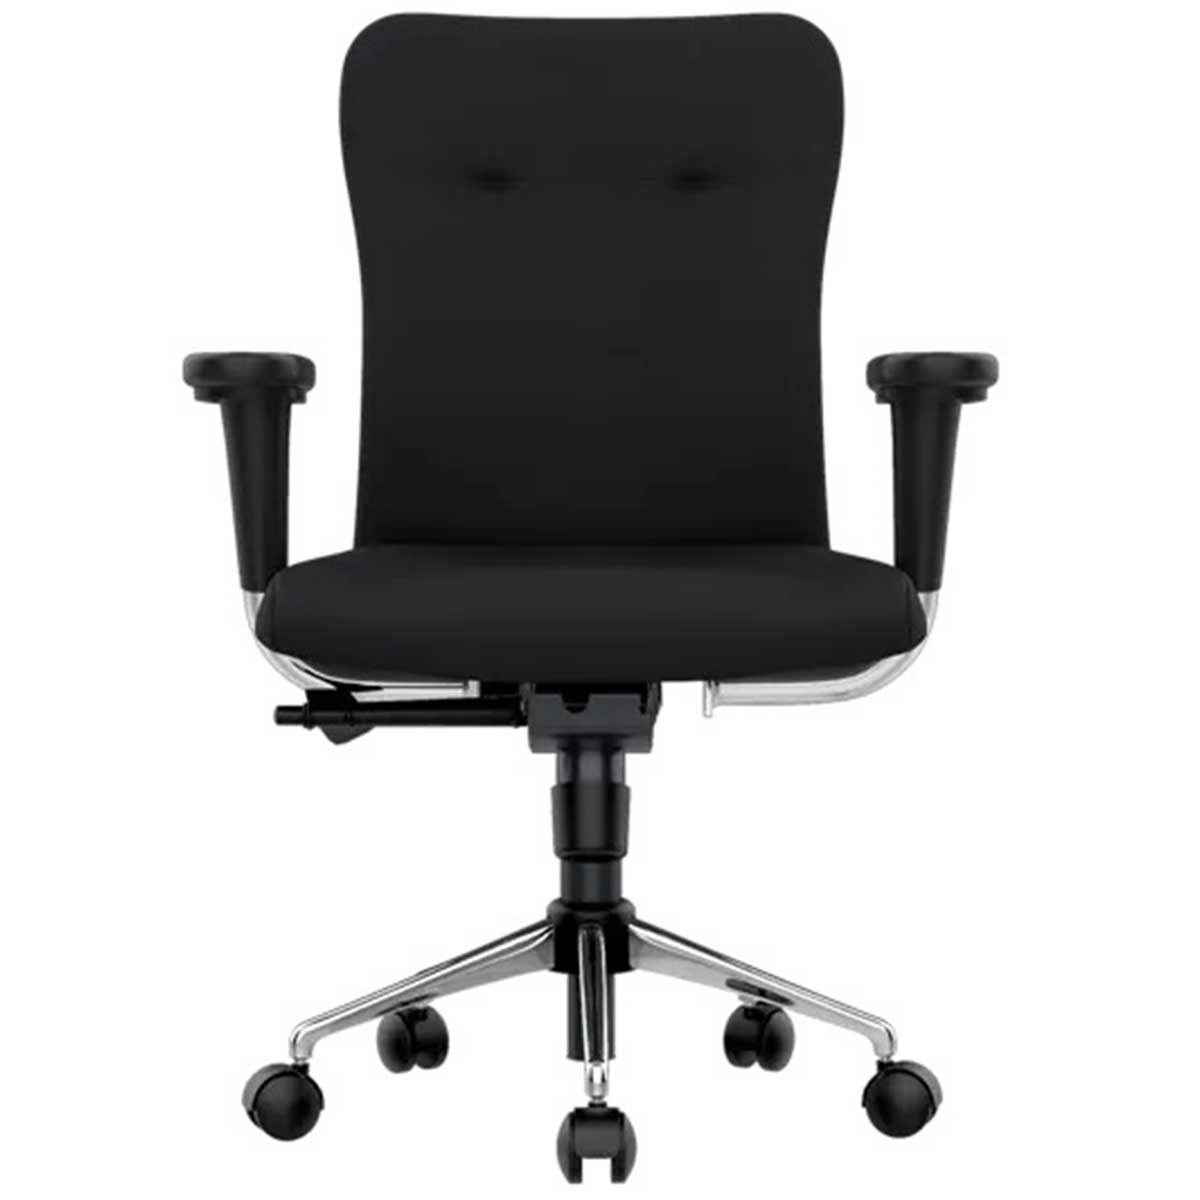 Fabric Office Chair Manufacturers, Suppliers, Exporters in Delhi 